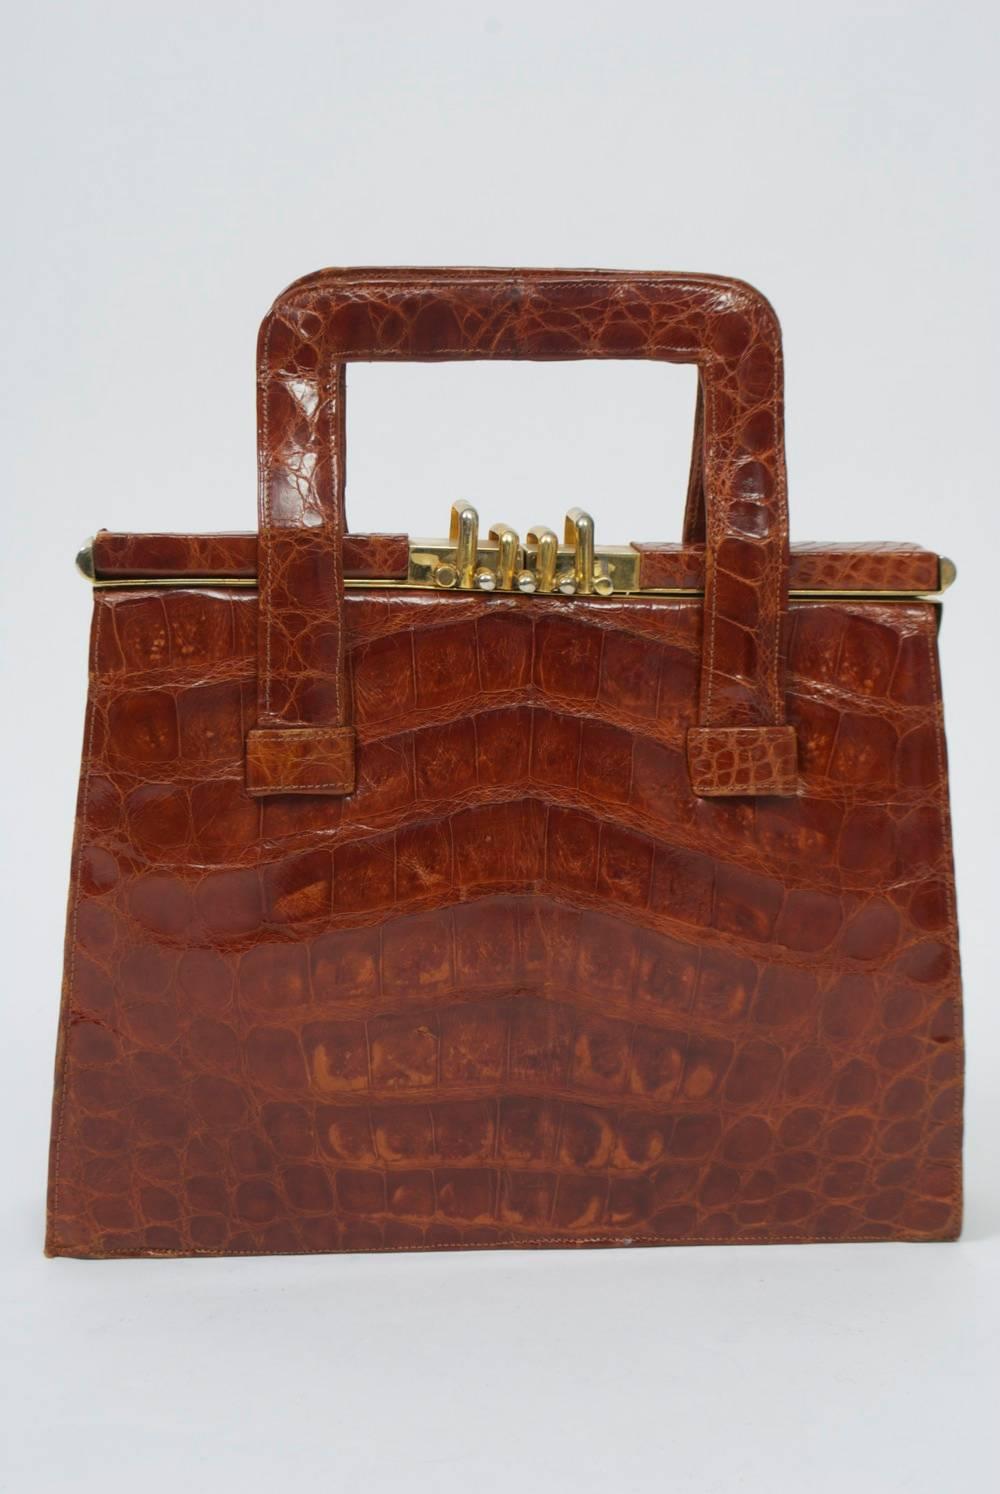 Alligator handbag, c.1950s, made in Argentina, in a rich shade of cognac. Structured, square shape with double handles and a gold metal frame partially covered in the alligator. At center, the unusual metal clasp pulls up to open the handbag. On the